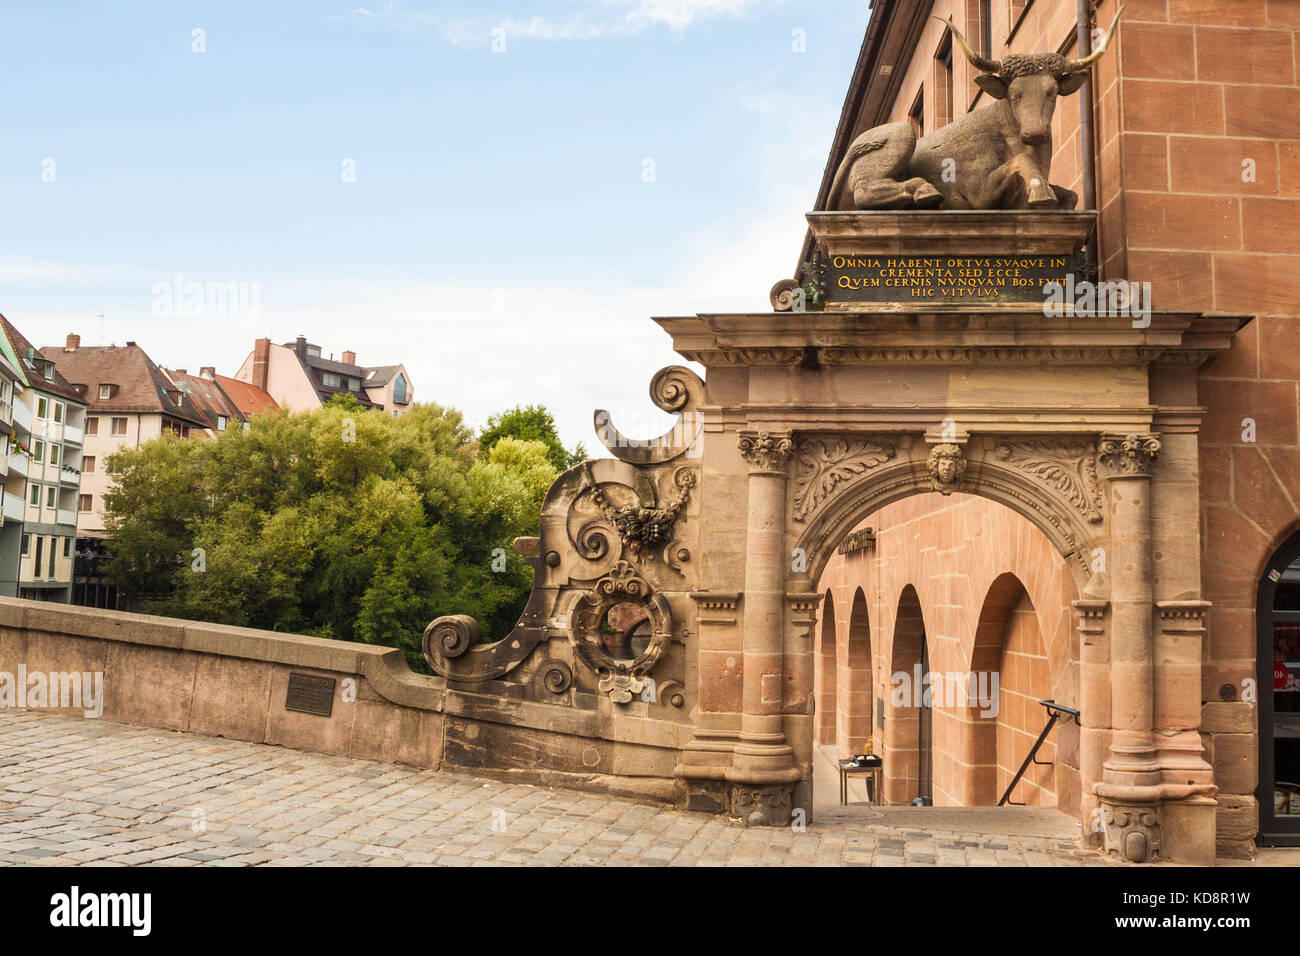 Nuremberg, Germany - August 28, 2016: The Ochsenportal (Bull portal) on the ancient Fleisch Bridge in the old town of Nuremberg, Germany. Stock Photo